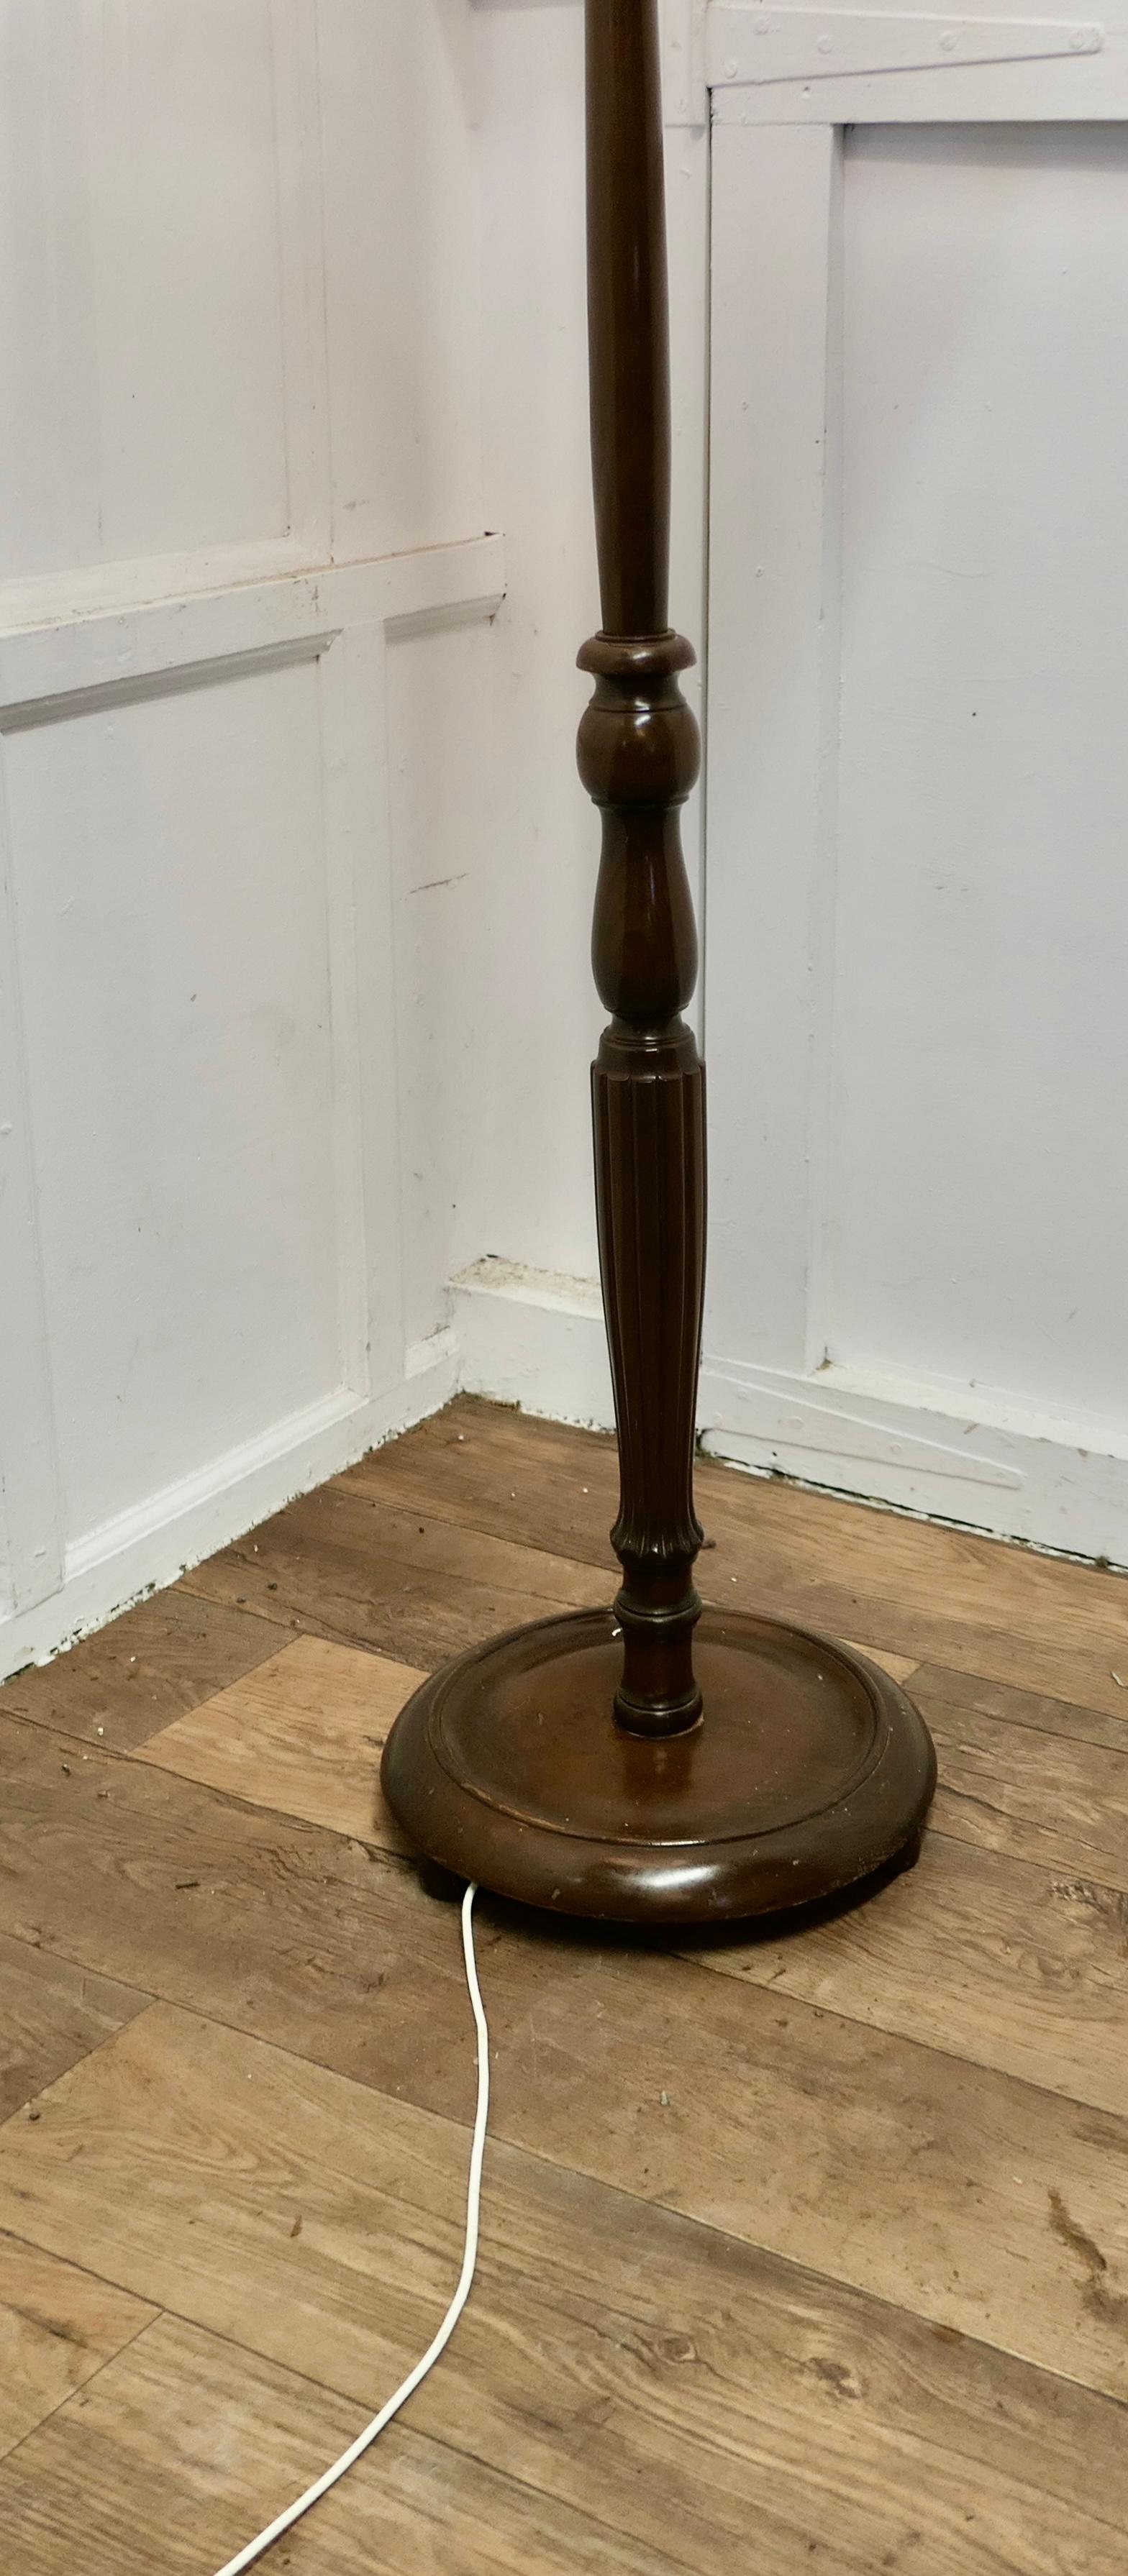 Turned Walnut Floor Lamp, Standard Lamp In Good Condition For Sale In Chillerton, Isle of Wight